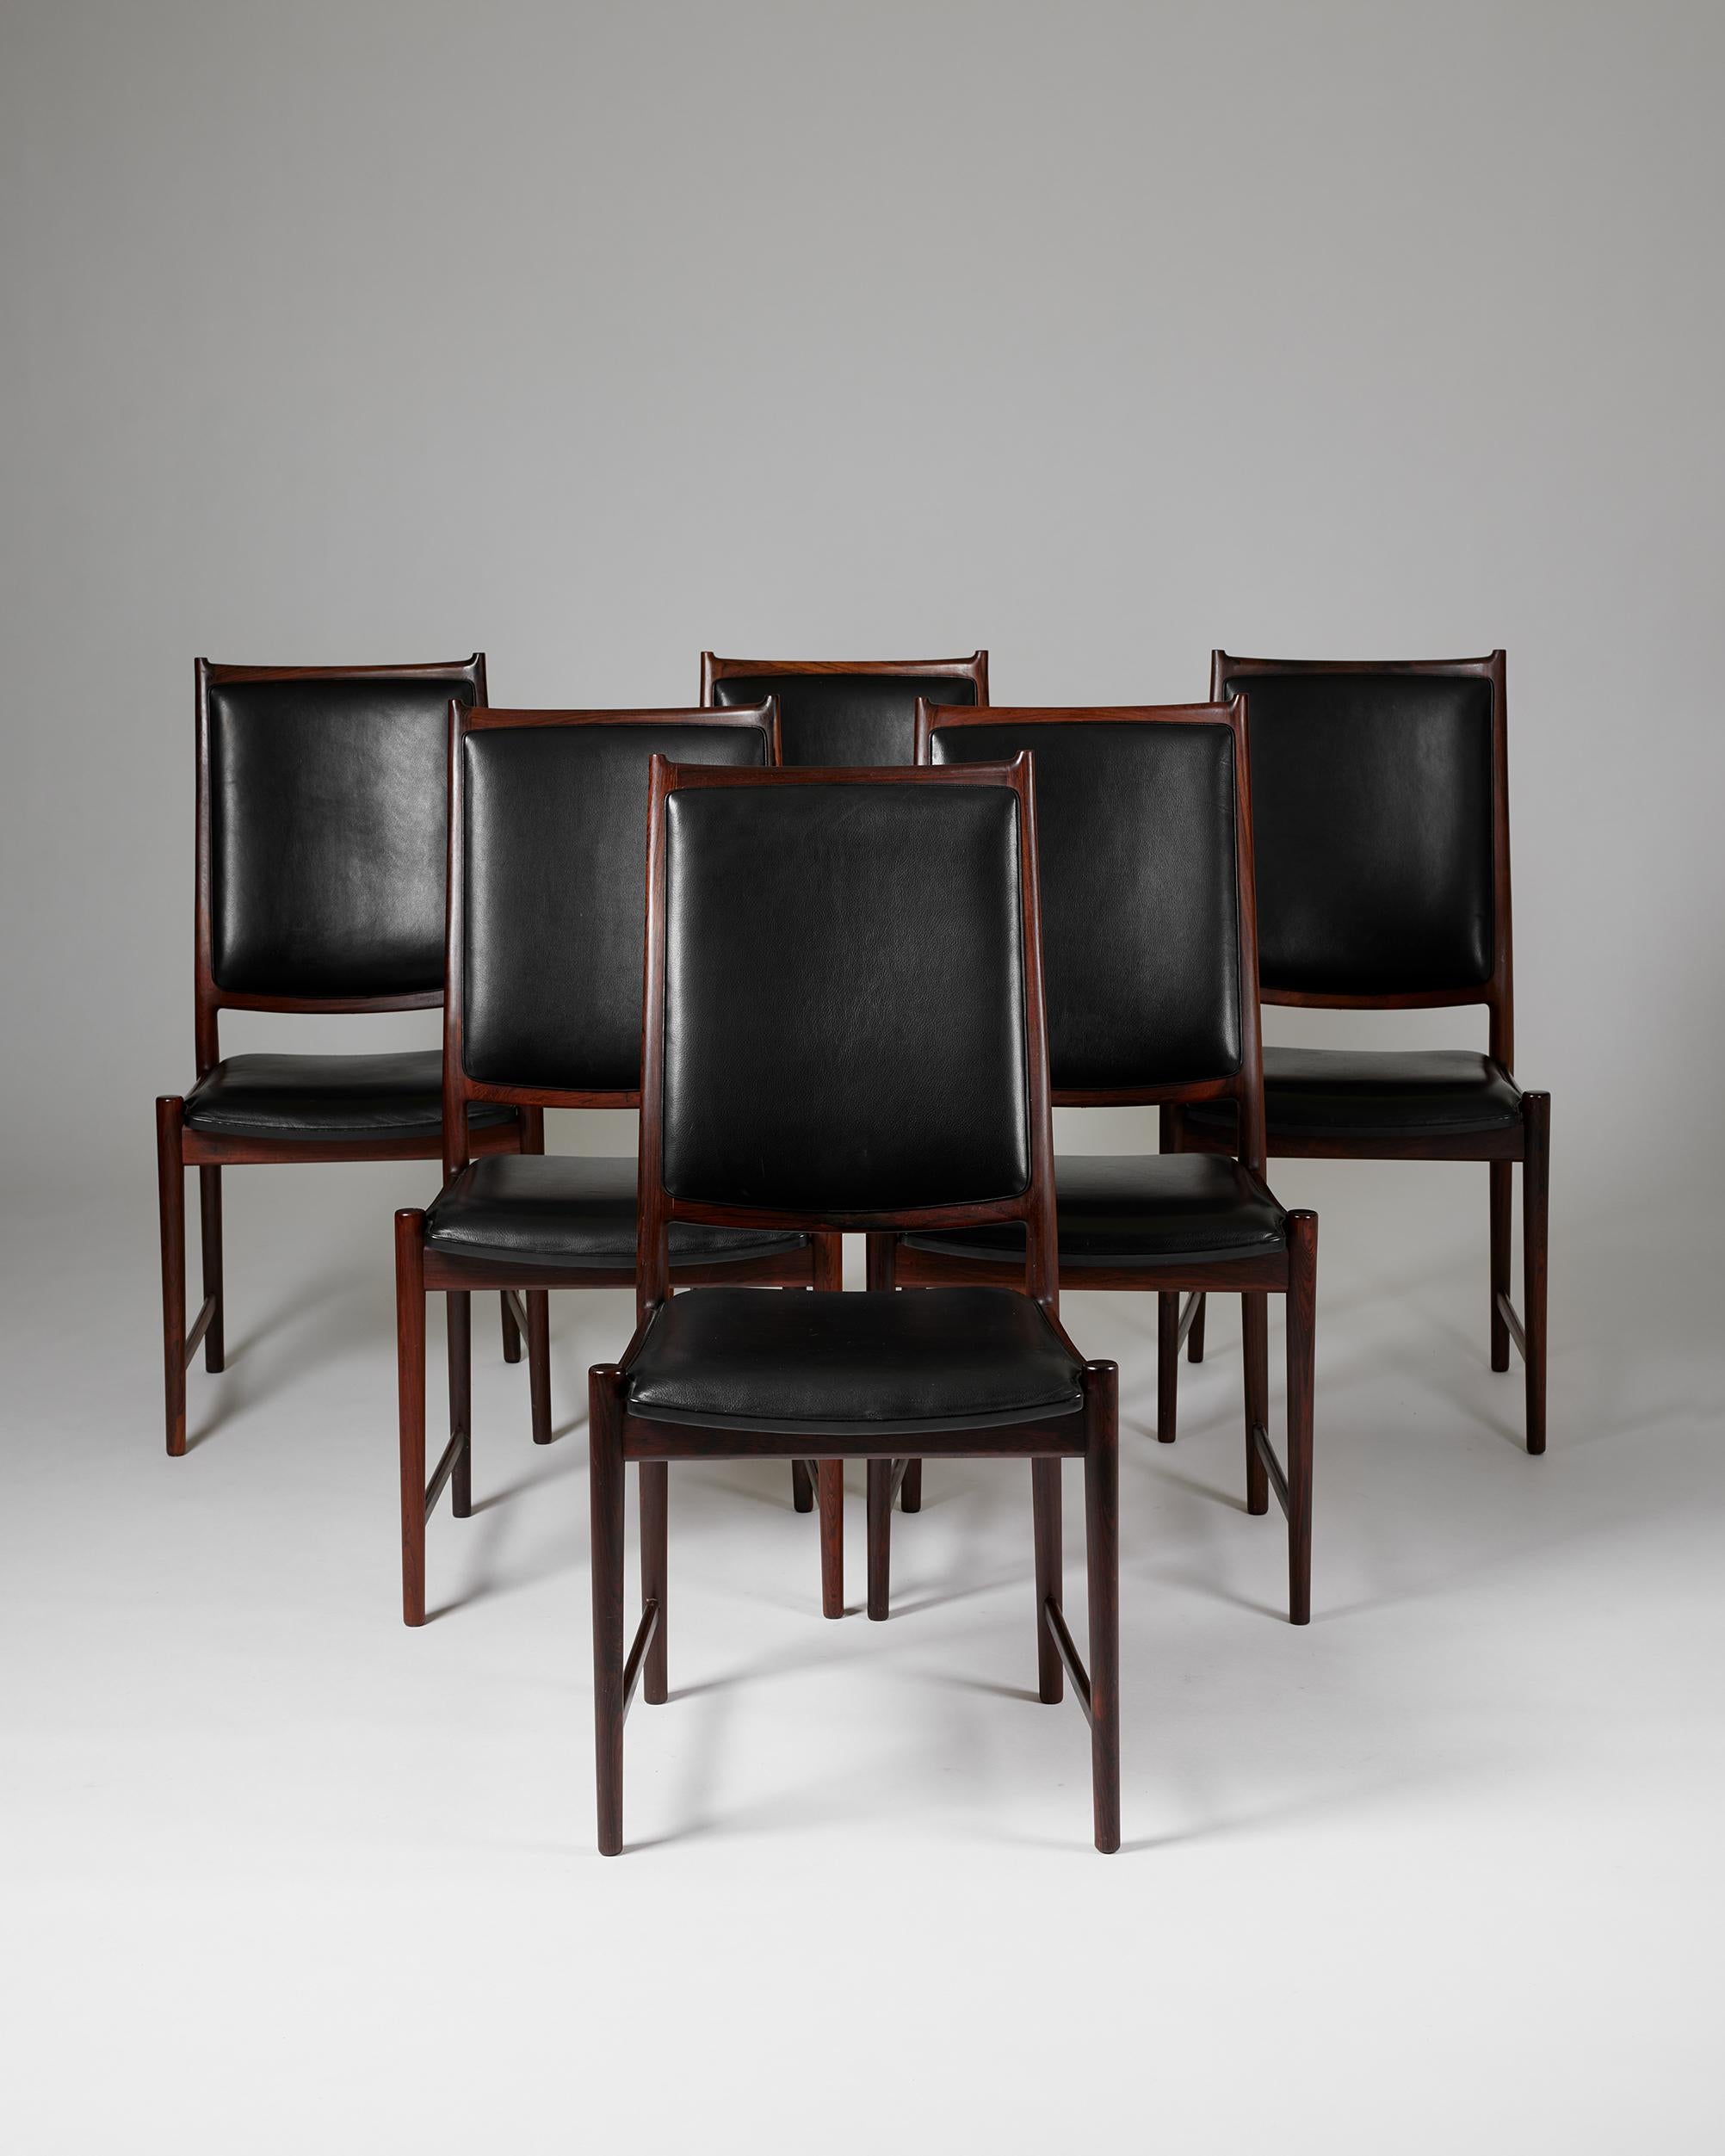 Set of six dining chairs ‘Darby’ designed by Torbjörn Afdal for Bruksbo,
Norway, 1960s.

Rosewood and leather.

Stamped.

H: 96 cm
W: 47.5 cm
D: 58 cm 
SH: 45 cm